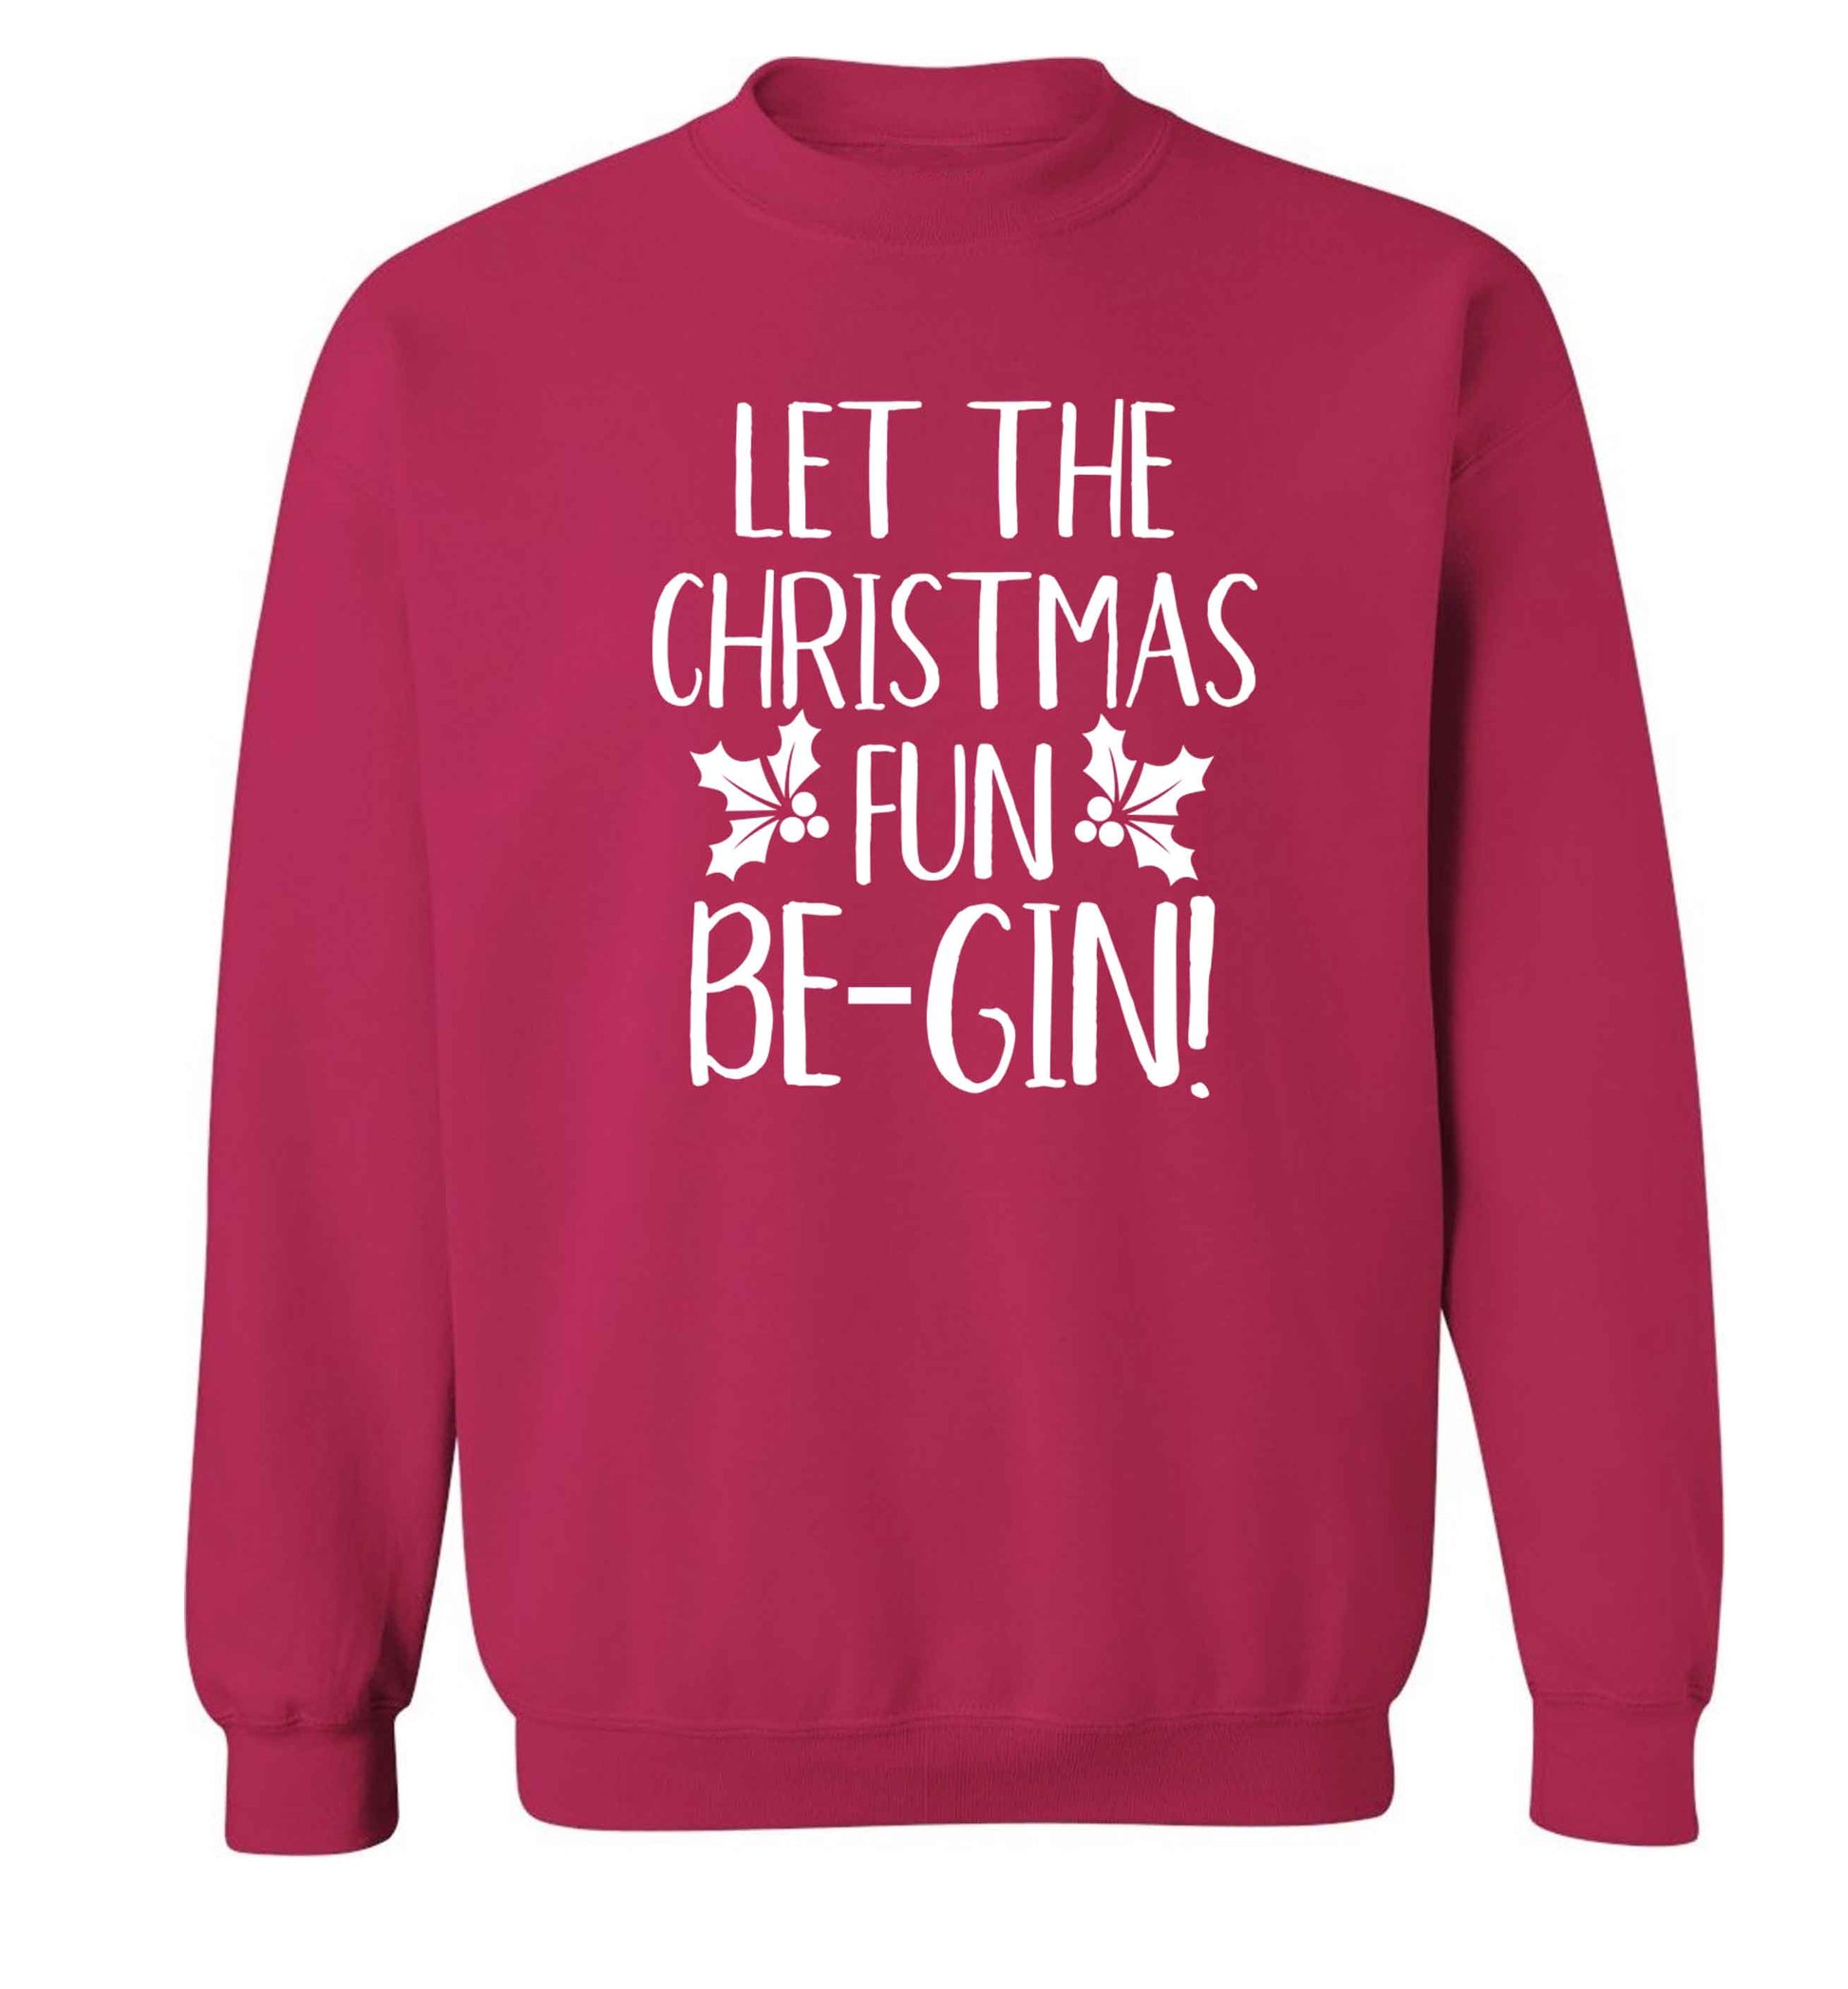 Let the christmas fun be-gin Adult's unisex pink Sweater 2XL